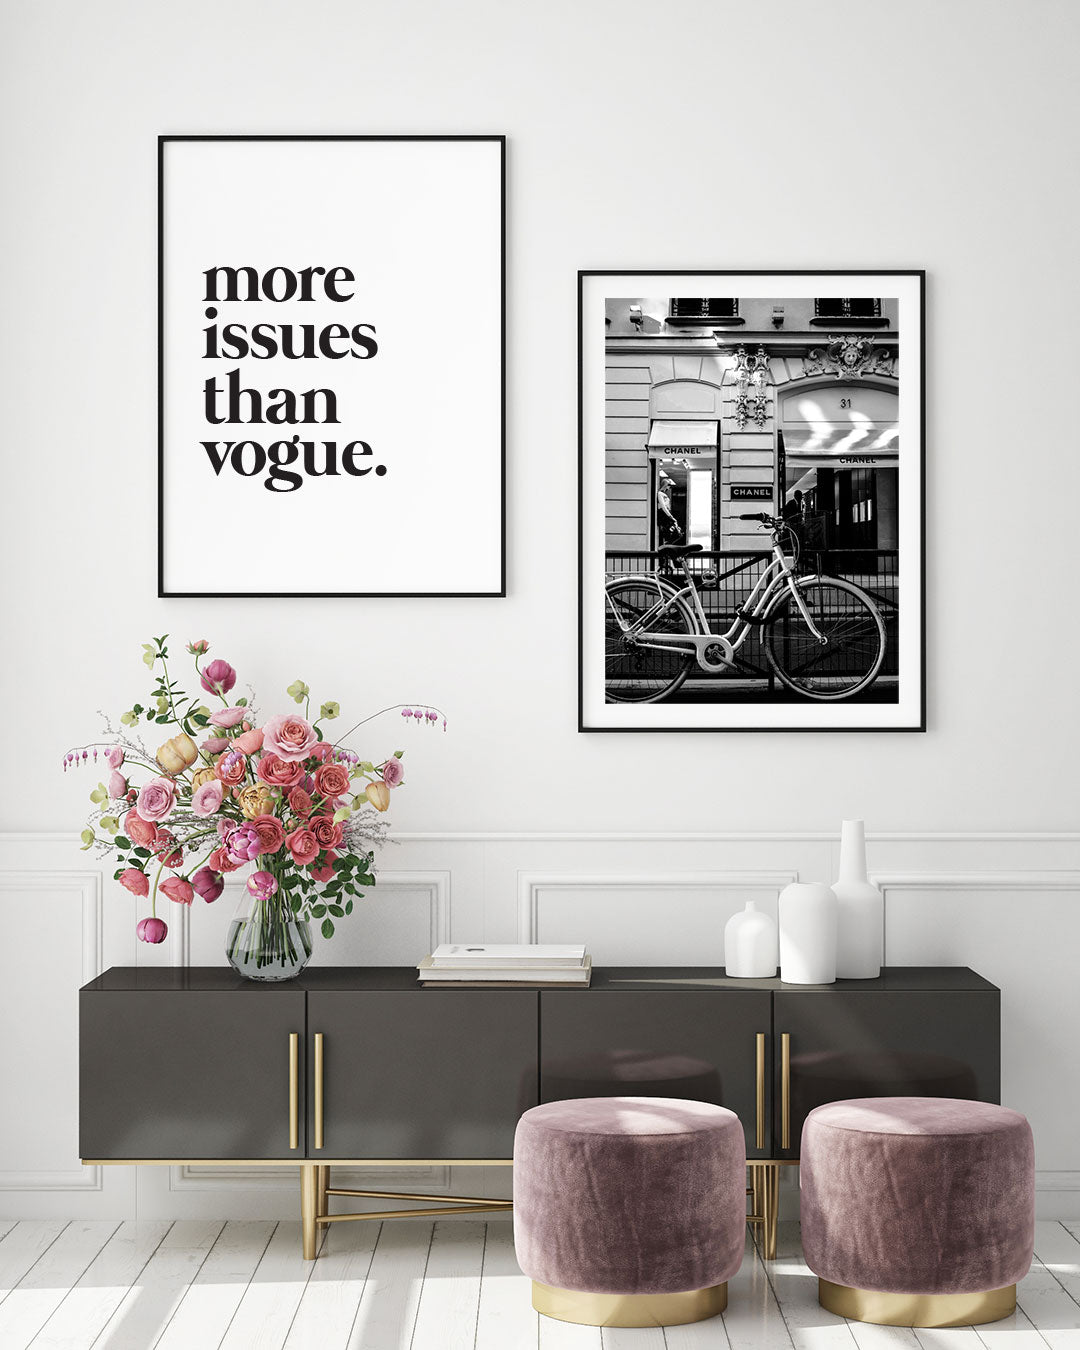 Chanel Bicycle Fashion Poster  Designer Chanel Wall Art – Postermod